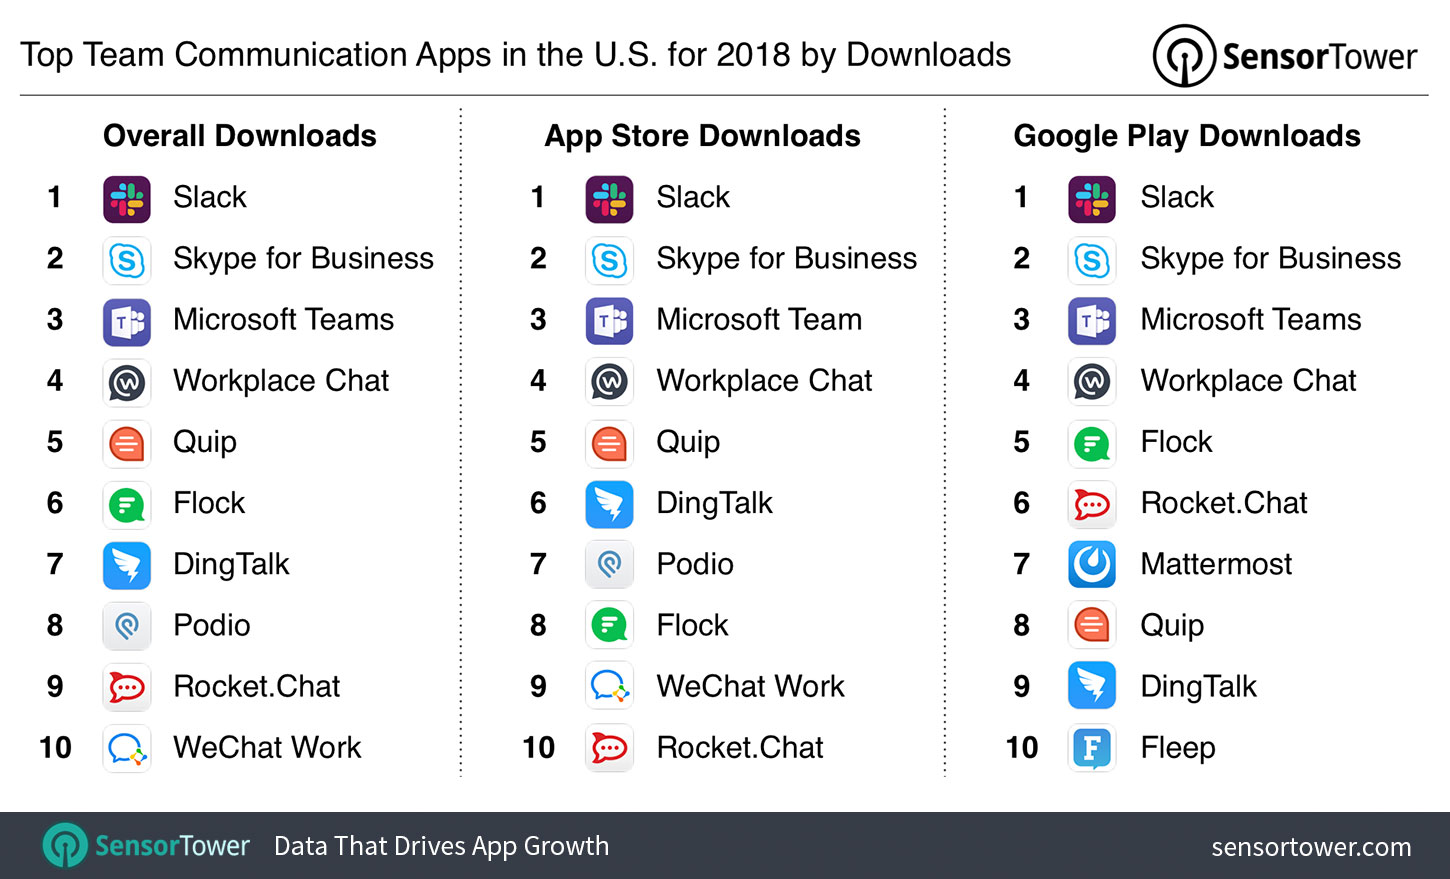 Top Team Communication Apps in the U.S. for 2018